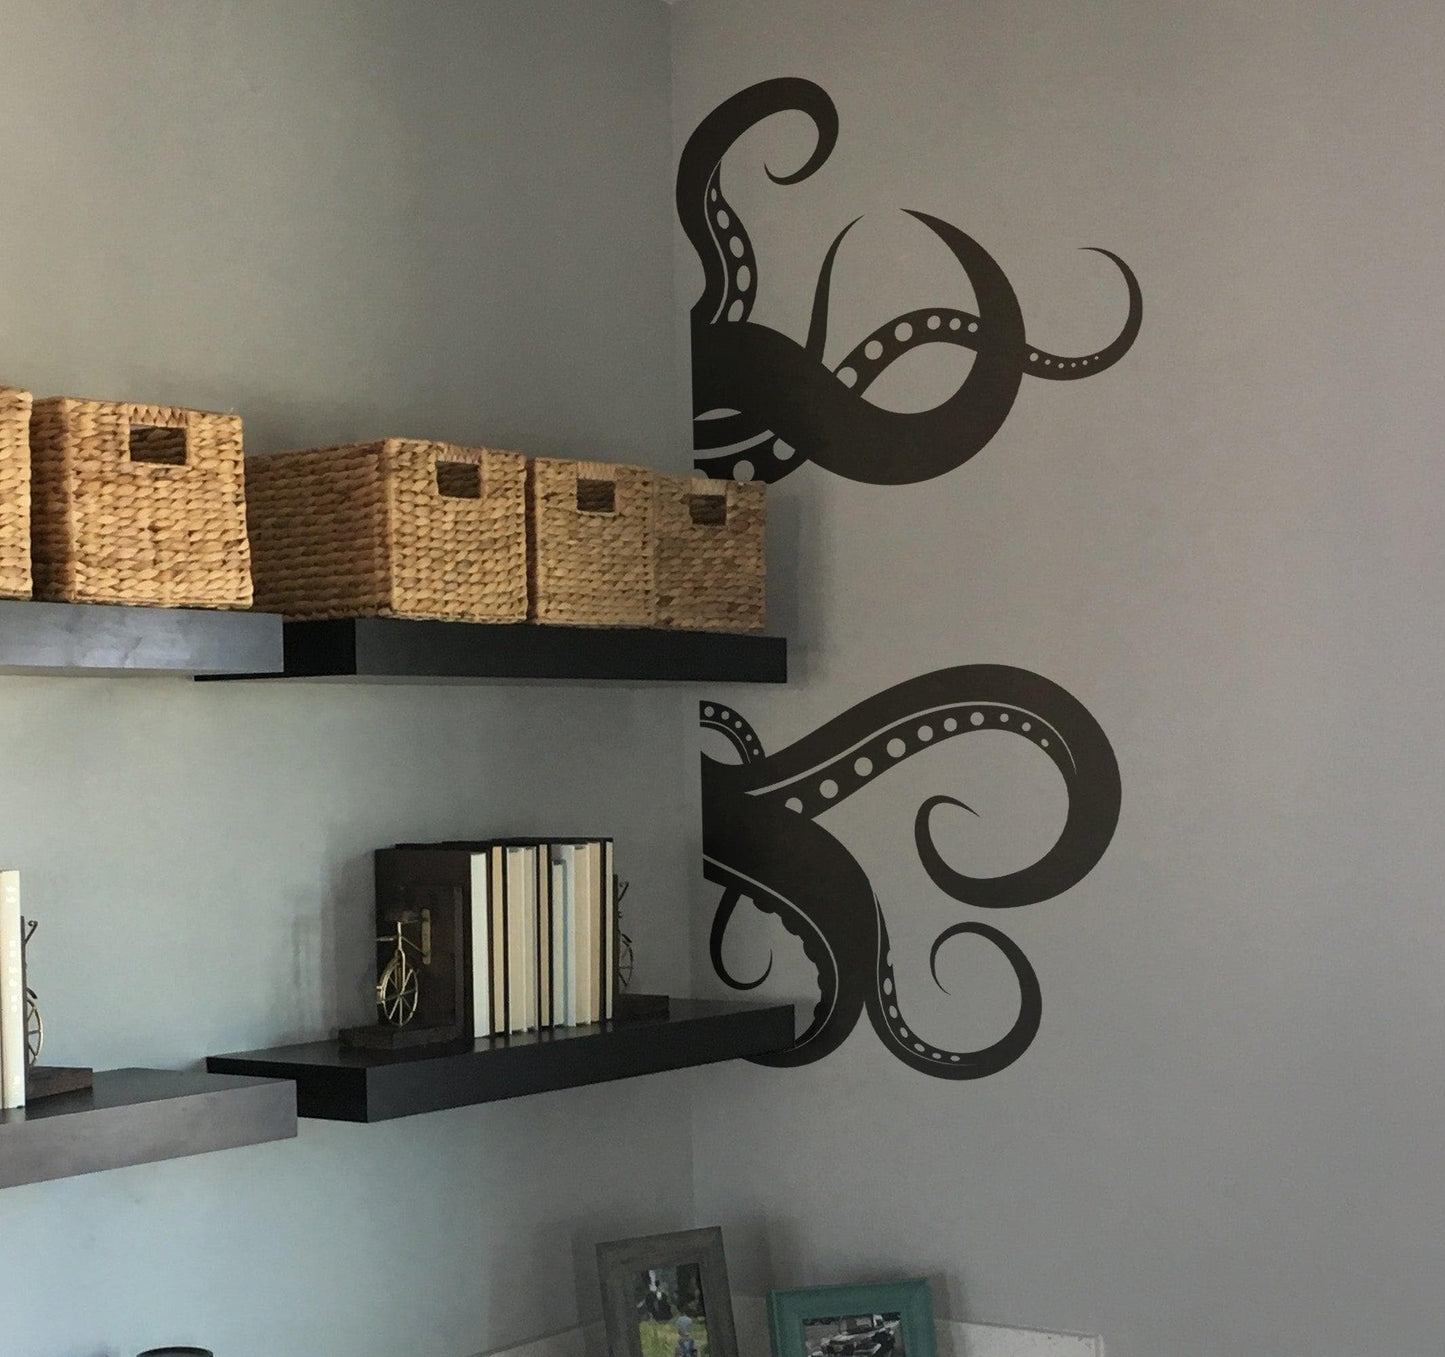 Black octopus tentacles decal on a white wall near a shelf.